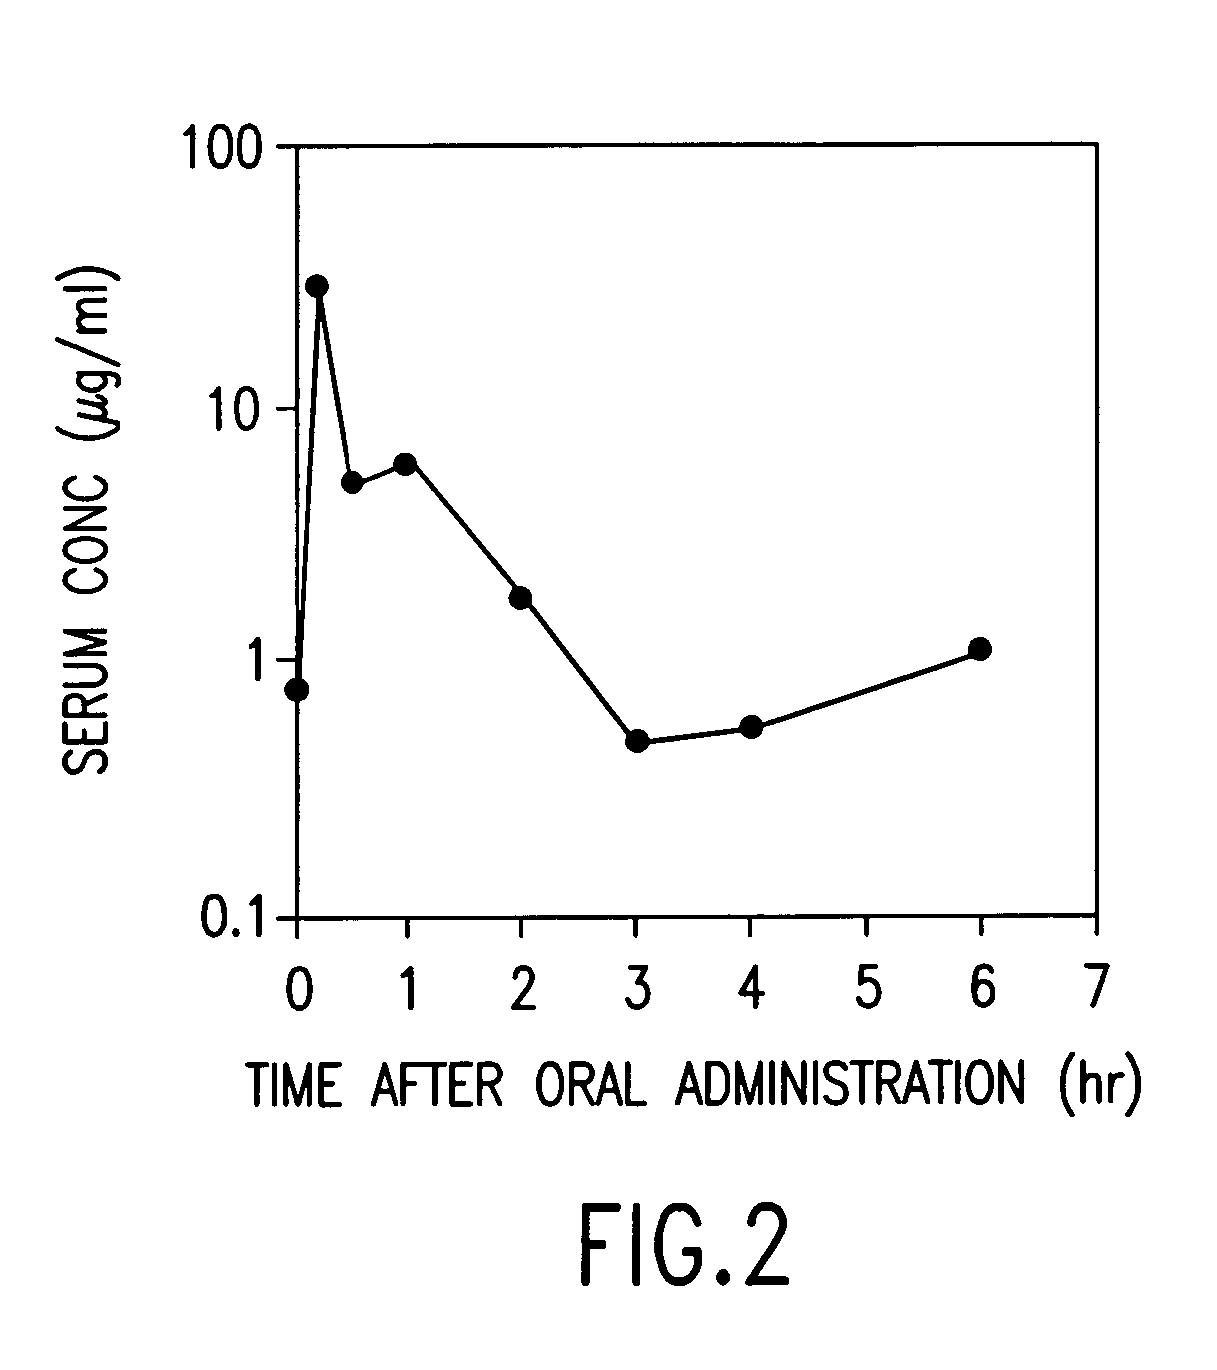 Dried forms of aqueous solubilized bile acid dosage formulation: preparation and uses thereof